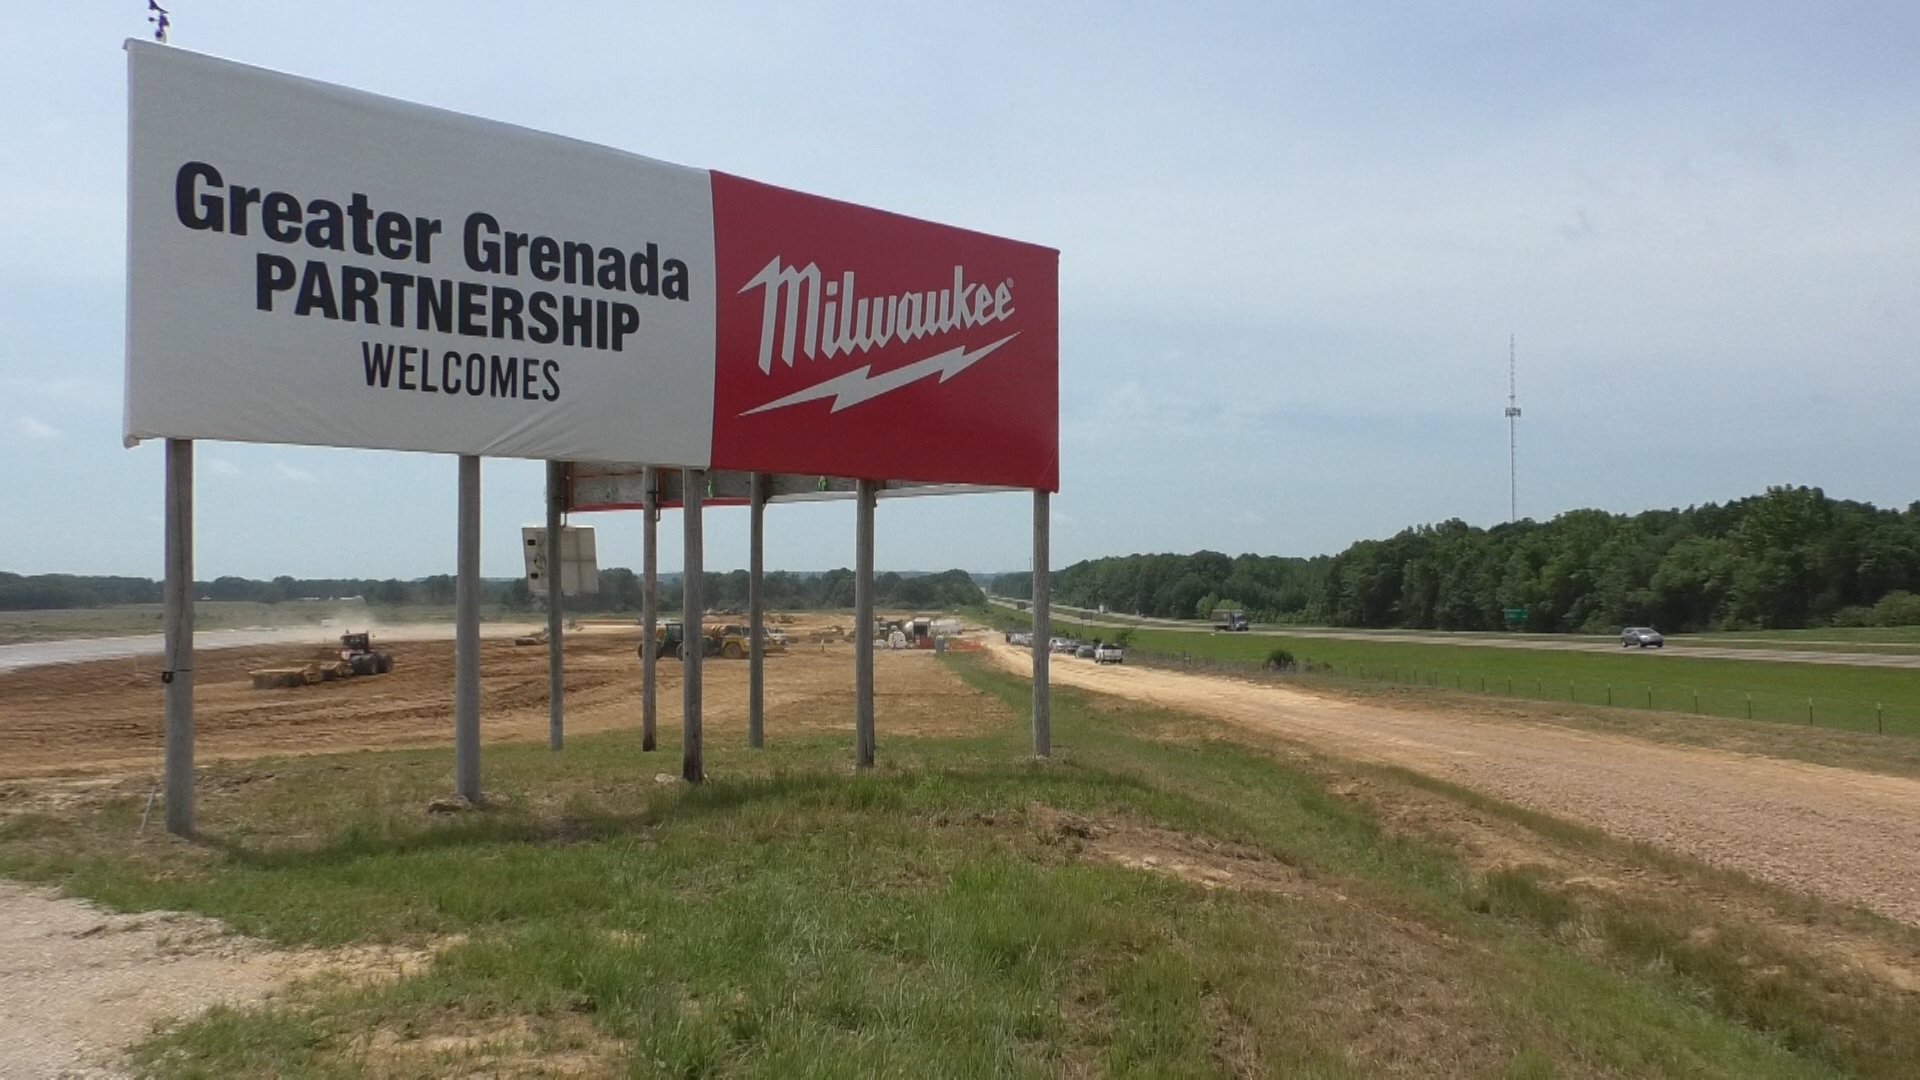 Milwaukee Tool plant bringing over 800 jobs to Grenada as they expand manufacturing across Mississippi